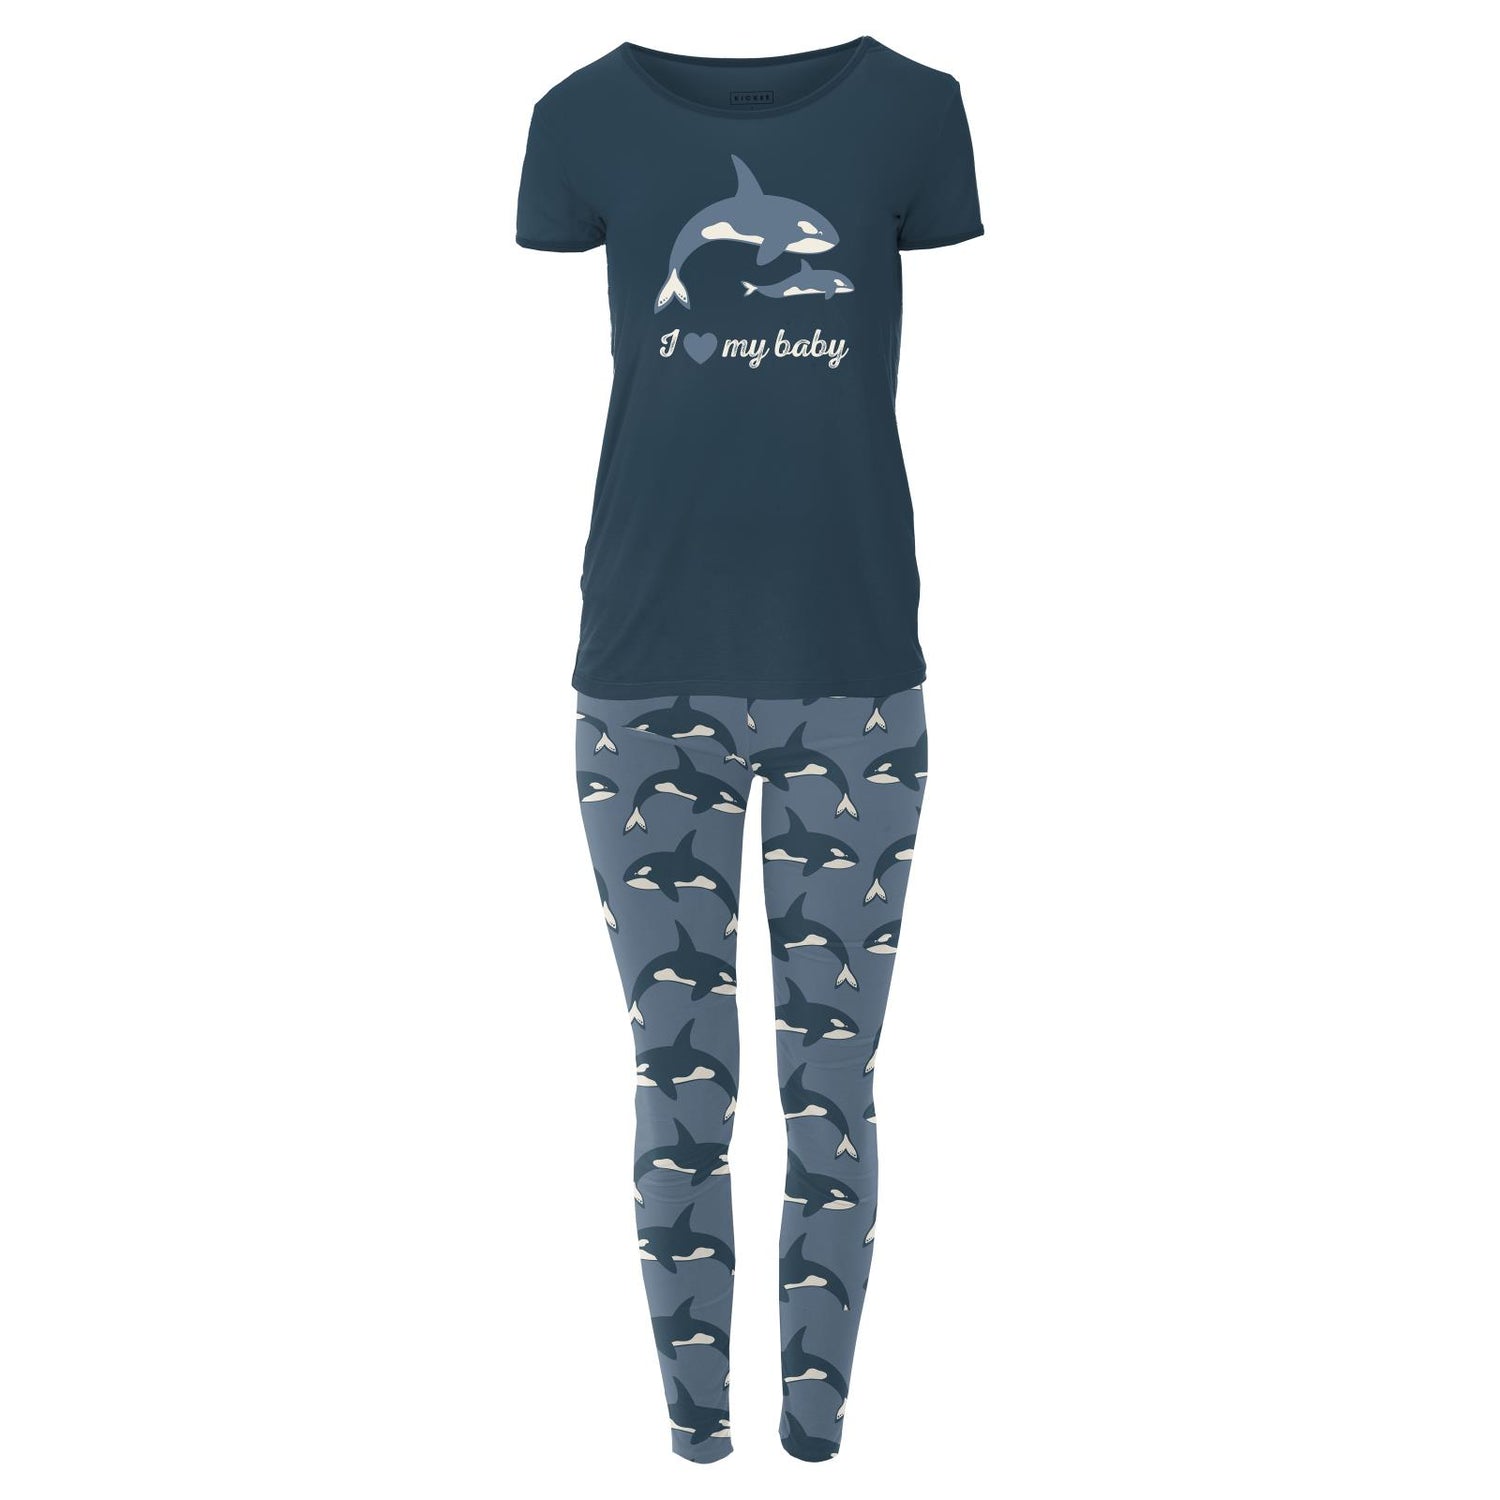 Women's Short Sleeve Graphic Tee Fitted Pajama Set in Parisian Blue Orca